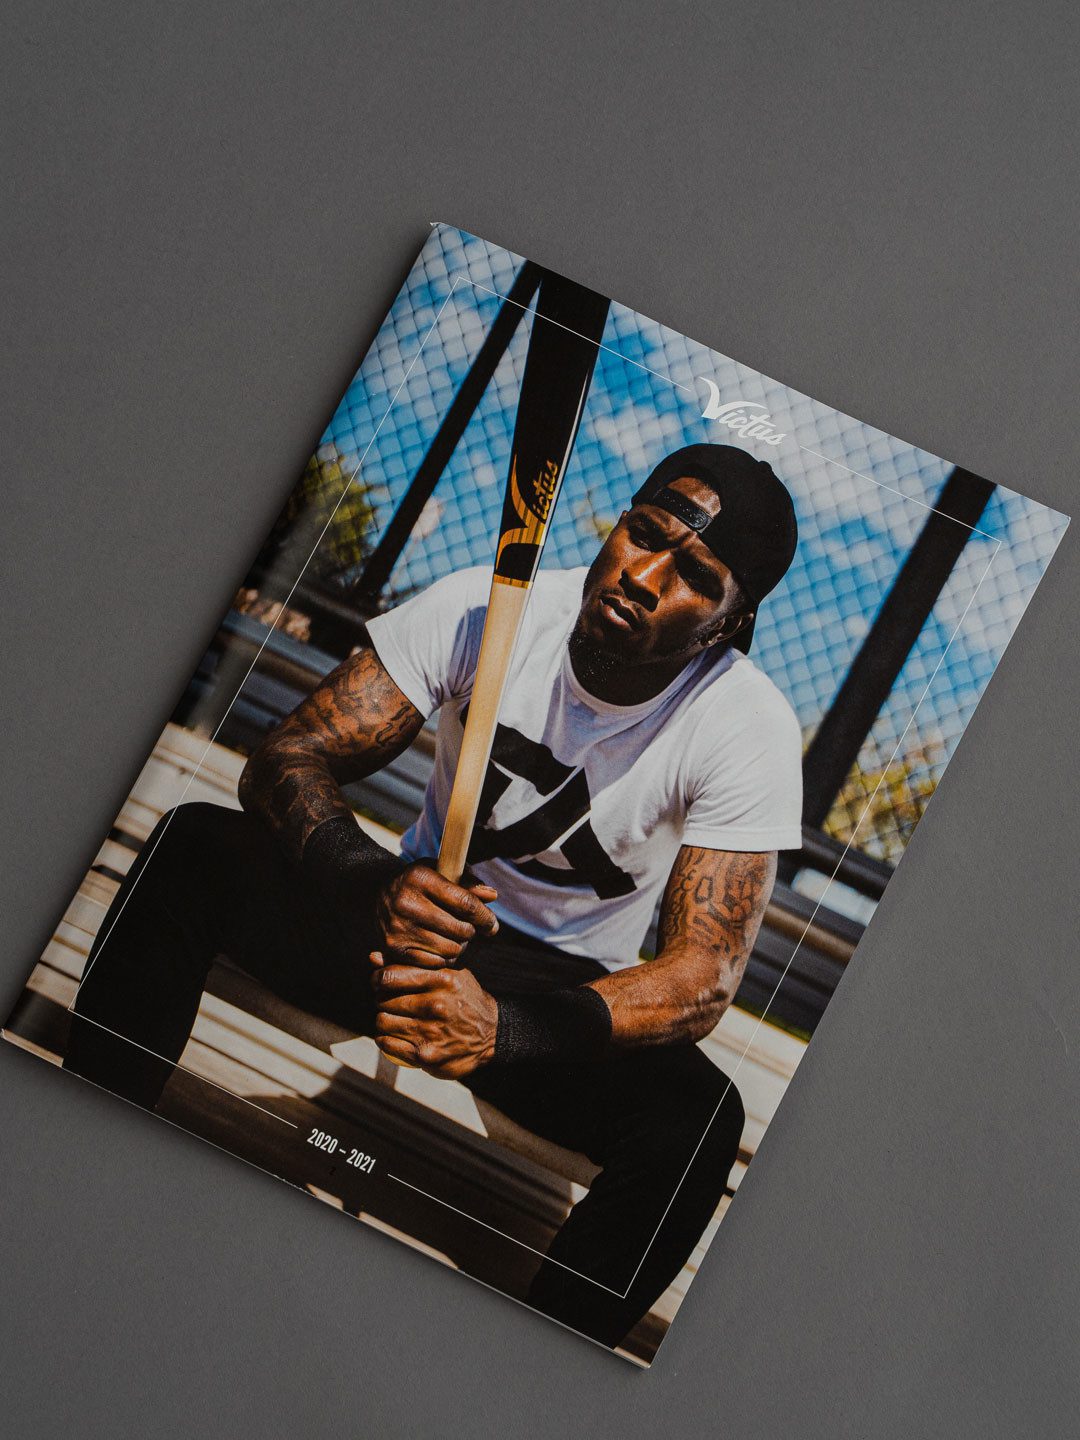 Back cover of the Victus Sports Product catalogue featuring Tim Anderson